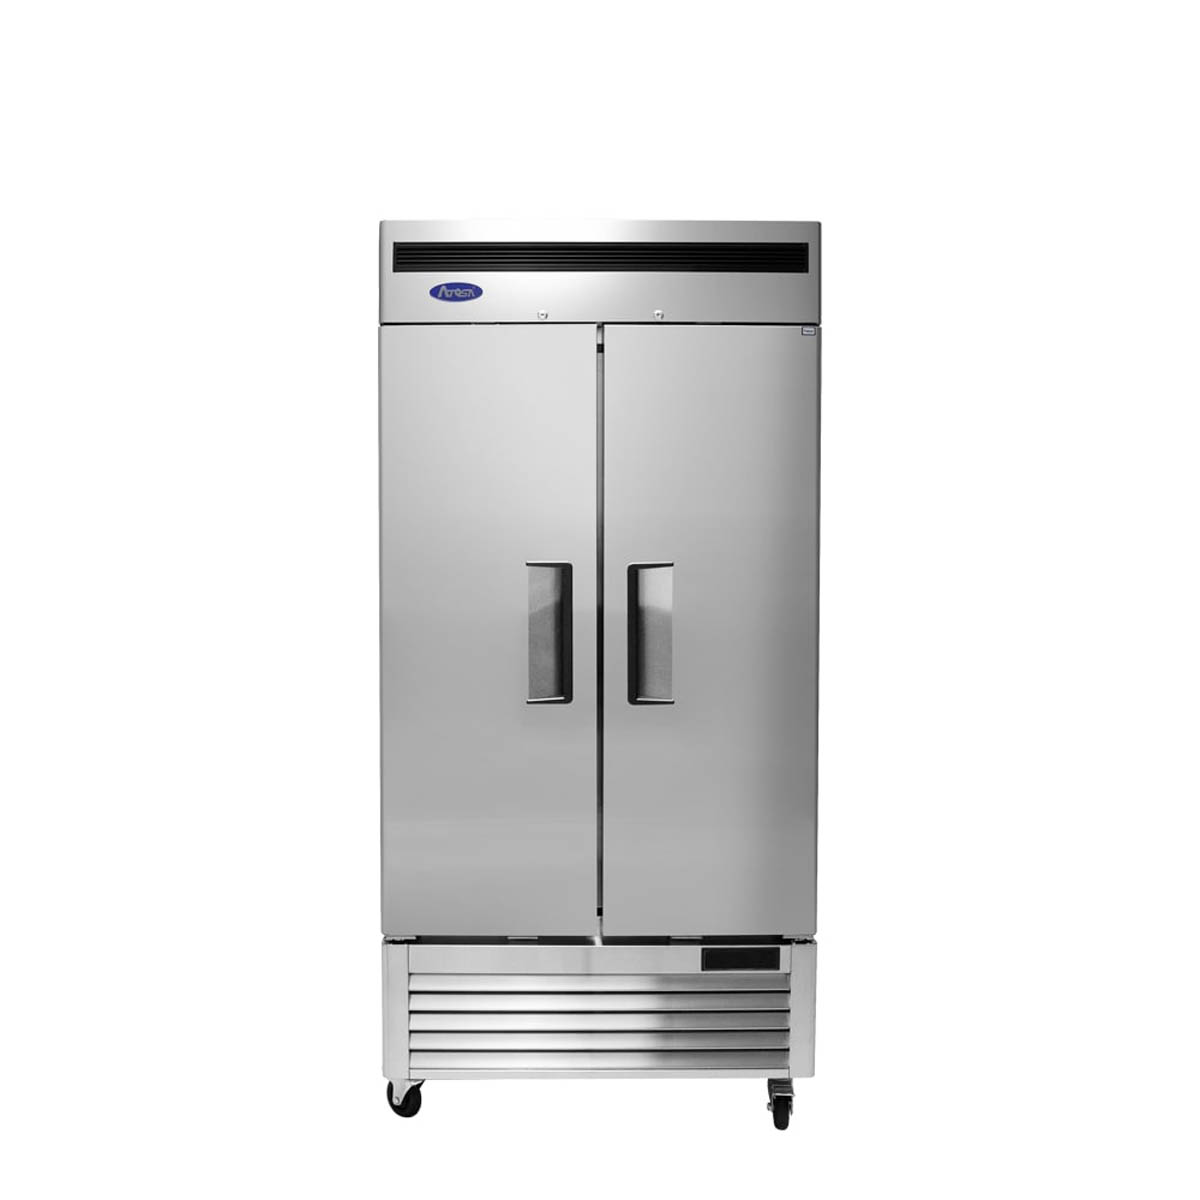 Atosa USA MBF8506GR Solid Door Reach-In Refrigerator, 2 Section